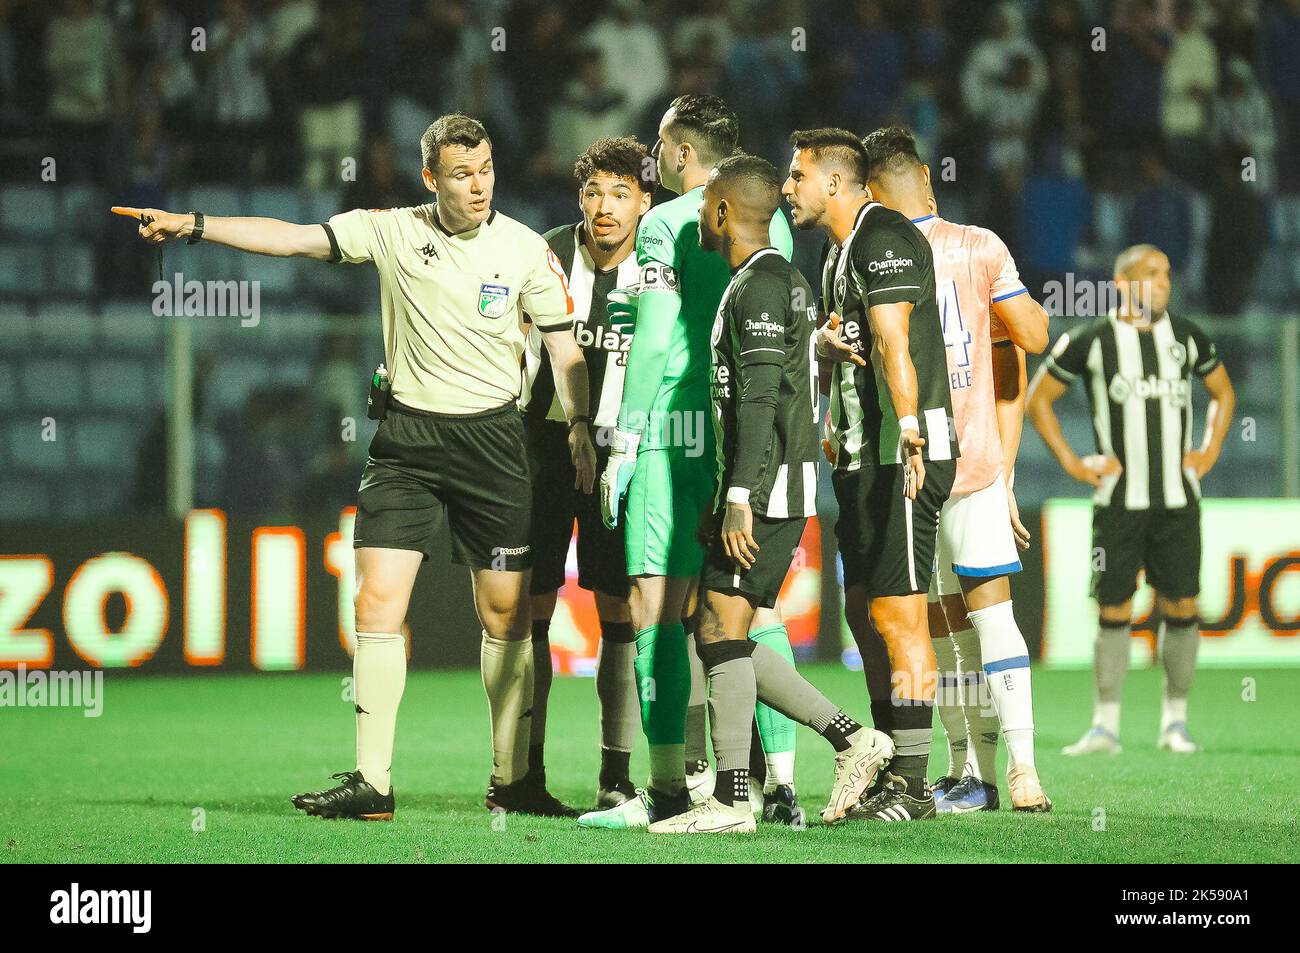 Florianopolis, Brazil. 06th Oct, 2022. SC - Florianopolis - 10/06/2022 - BRAZILIAN 2022 - AVAI X BOTAFOGO - Referee Paulo Cesar during a match between Avai and Botafogo at the Ressacada stadium for the Brazilian championship A 2022. Photo: R.Pierre/AGIF/Sipa USA Credit: Sipa USA/Alamy Live News Stock Photo